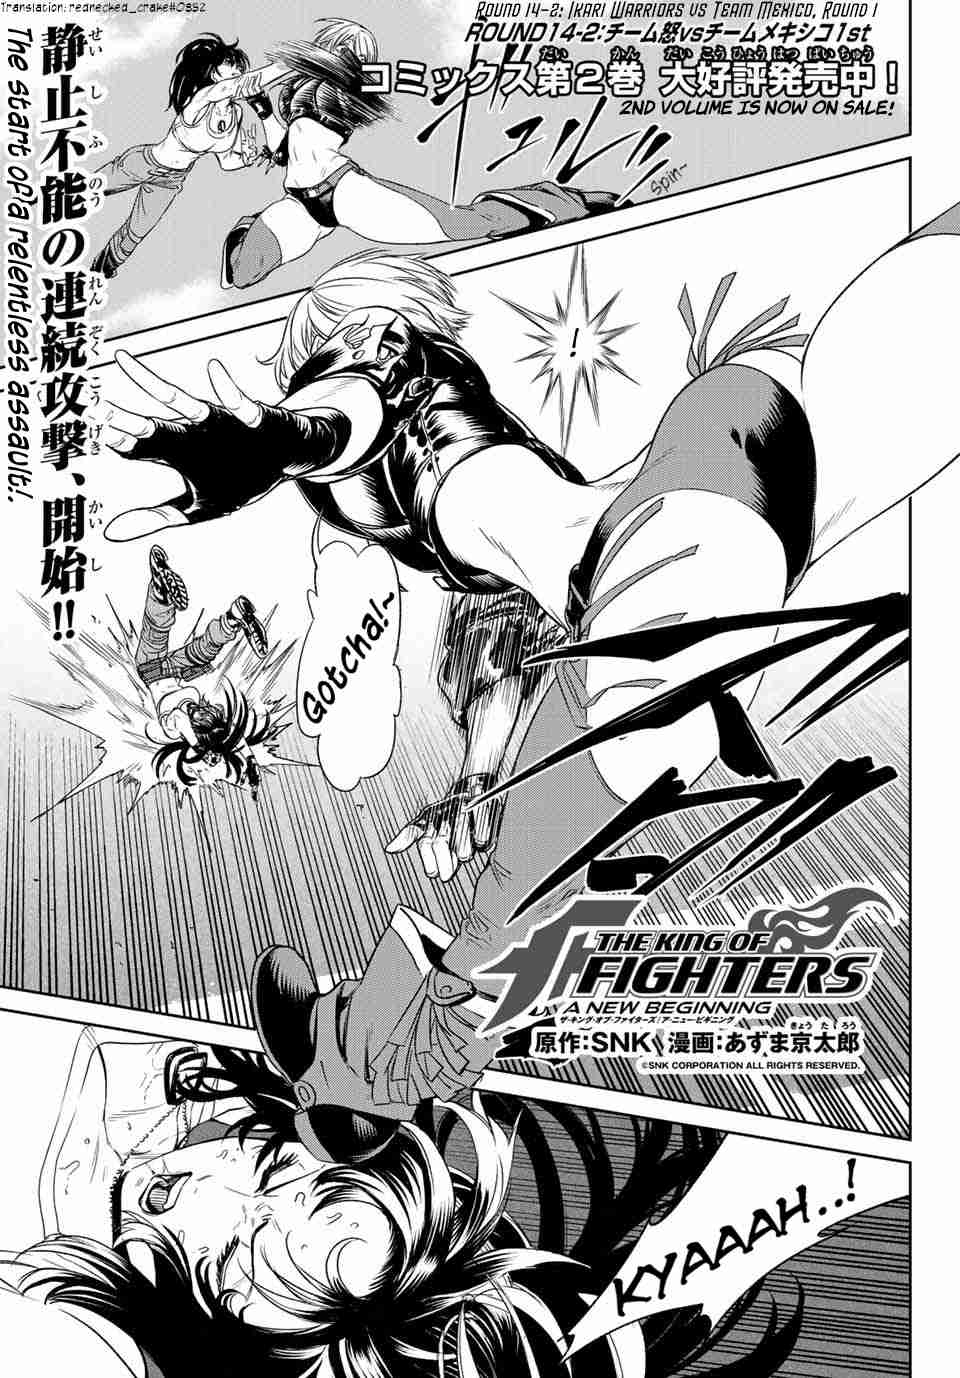 The King of Fighters: A New Beginning Ch. 14.2 Team Ikari vs Team Mexico 1